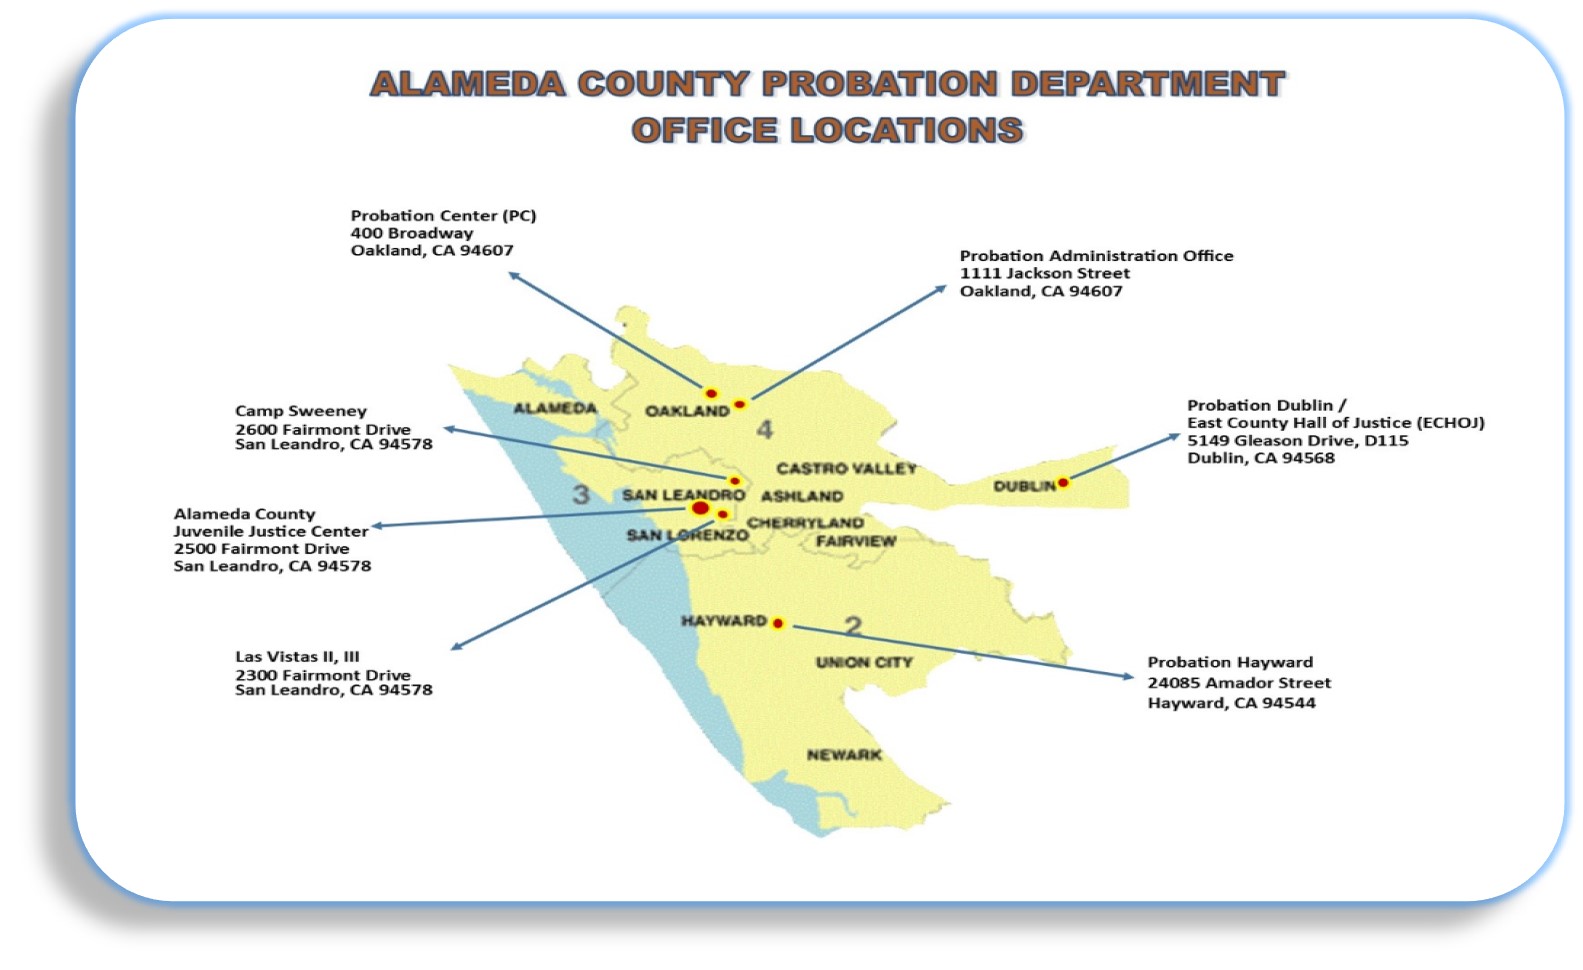 Alameda County Probation Department Office Locations